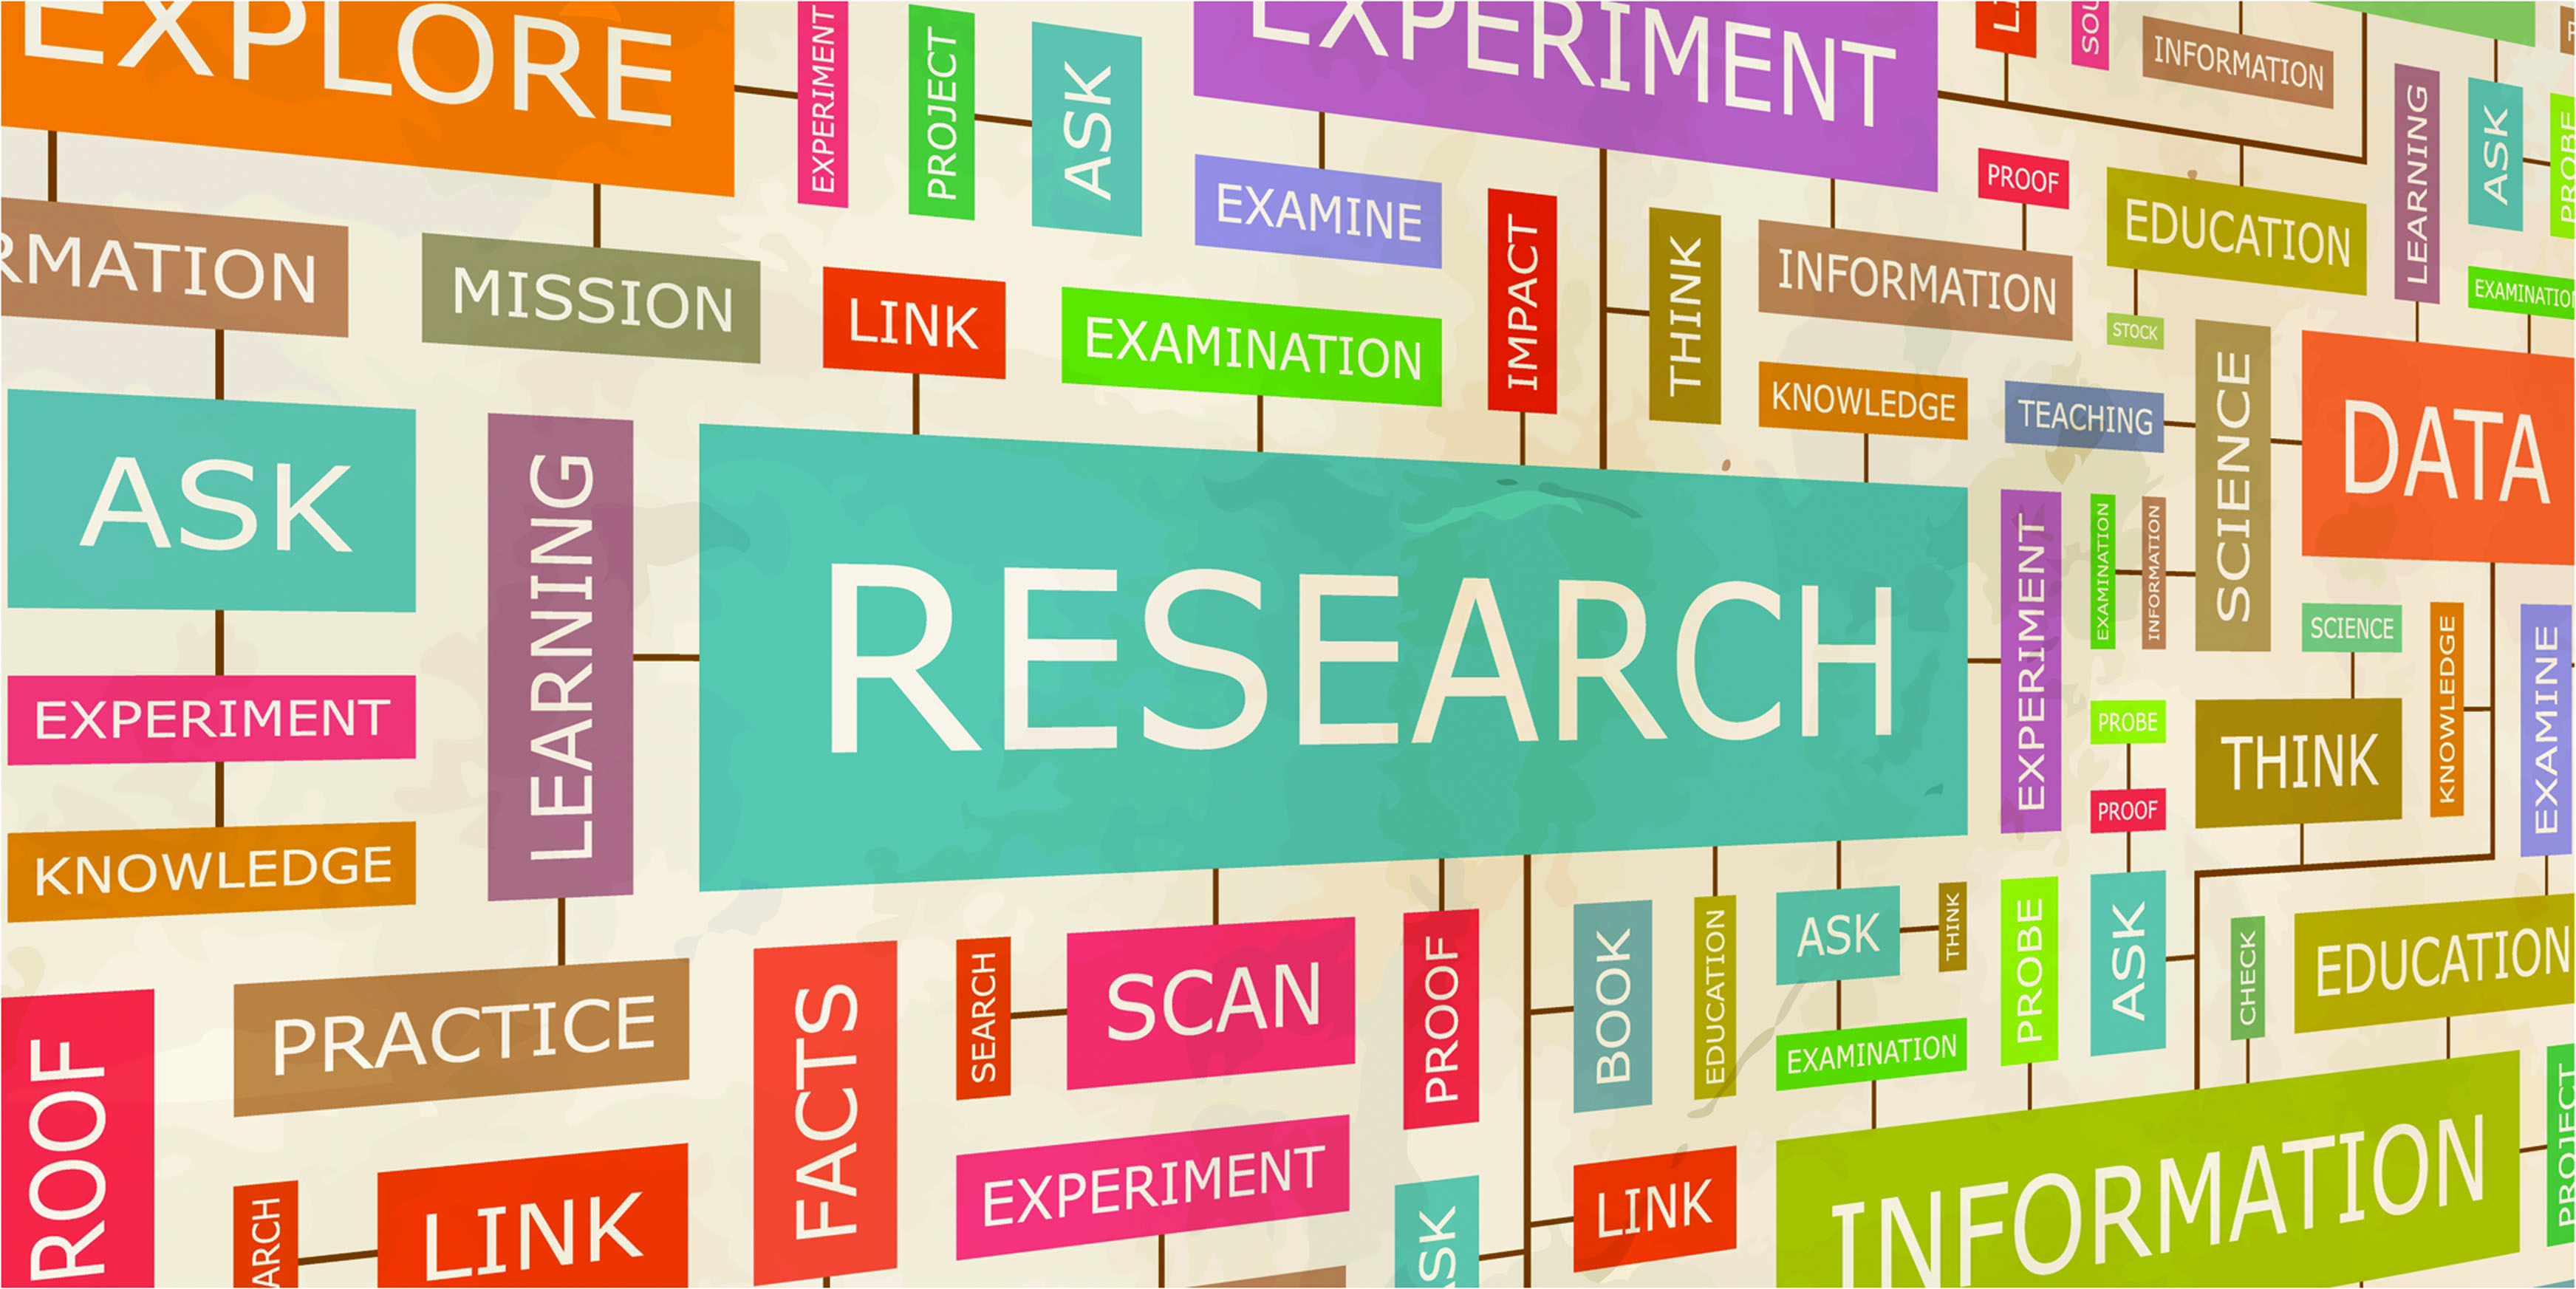 Introduce some research/project of Institute for Community Health Research (updating...)